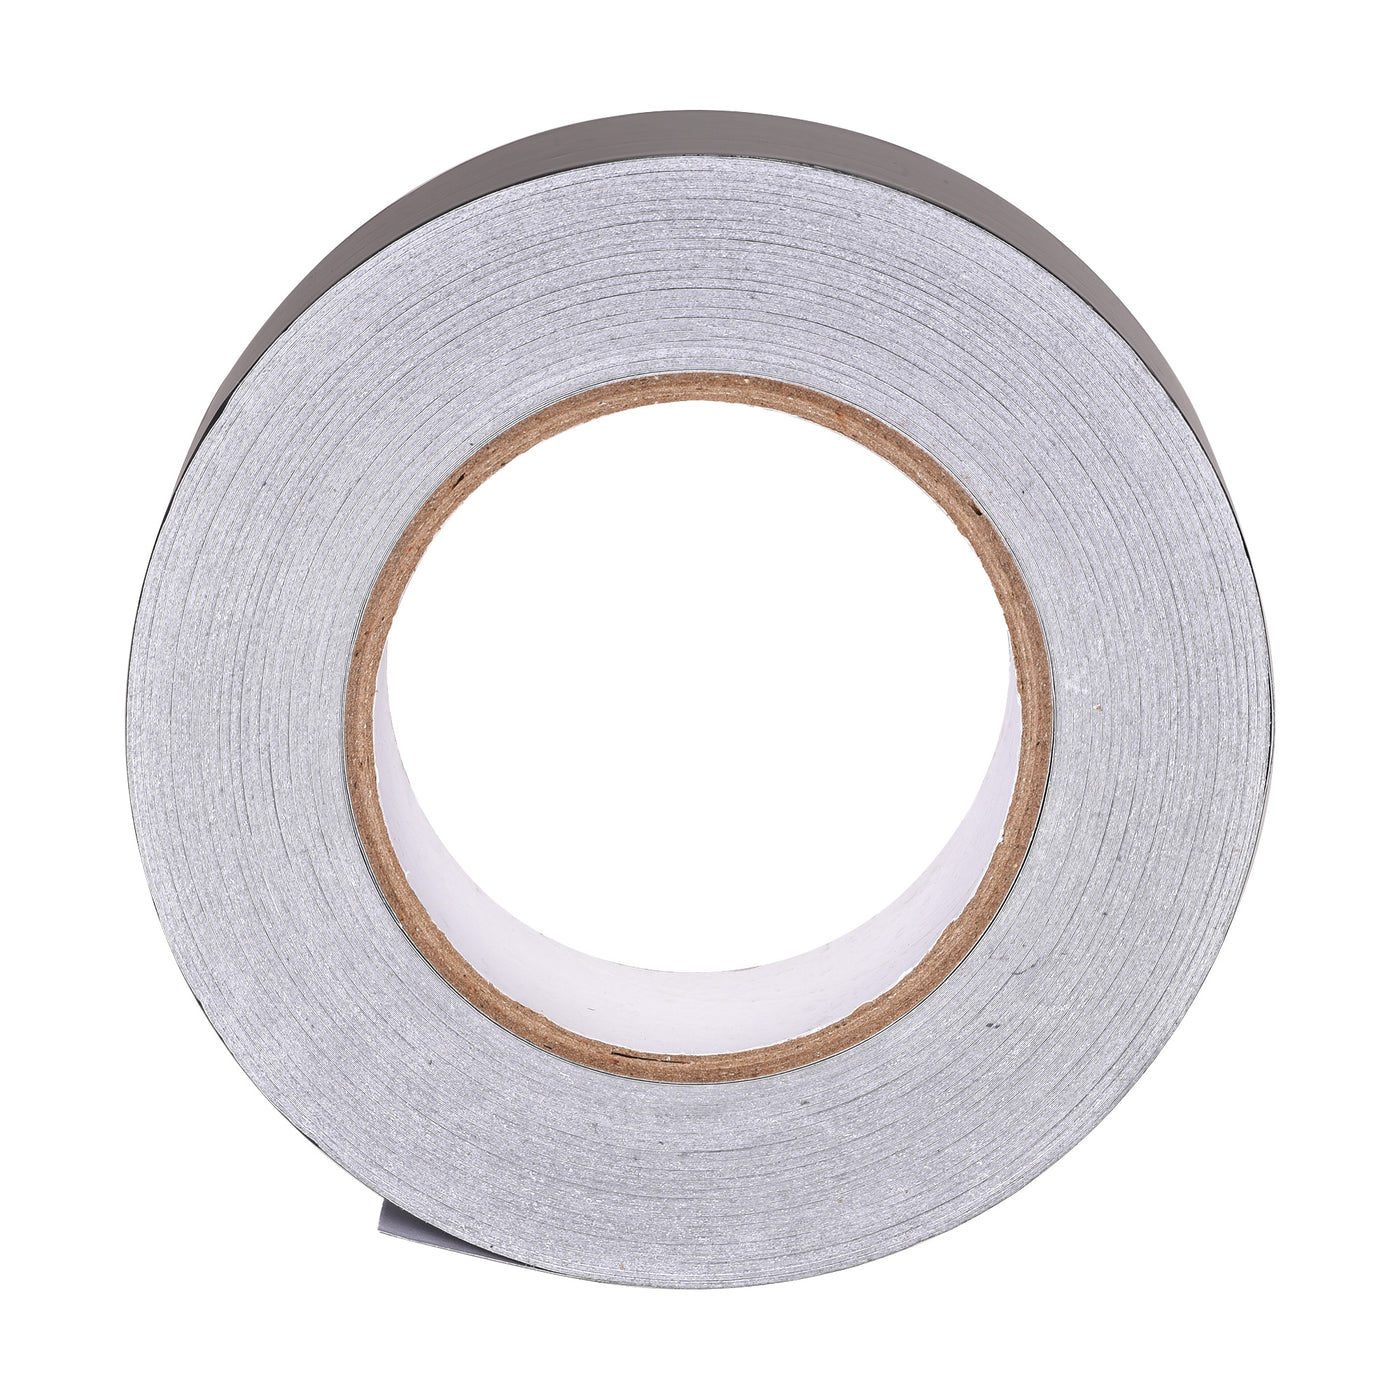 uxcell Uxcell 30mm Aluminum Foil Tape for HVAC, Patching Hot and Blocking light 50m/164ft